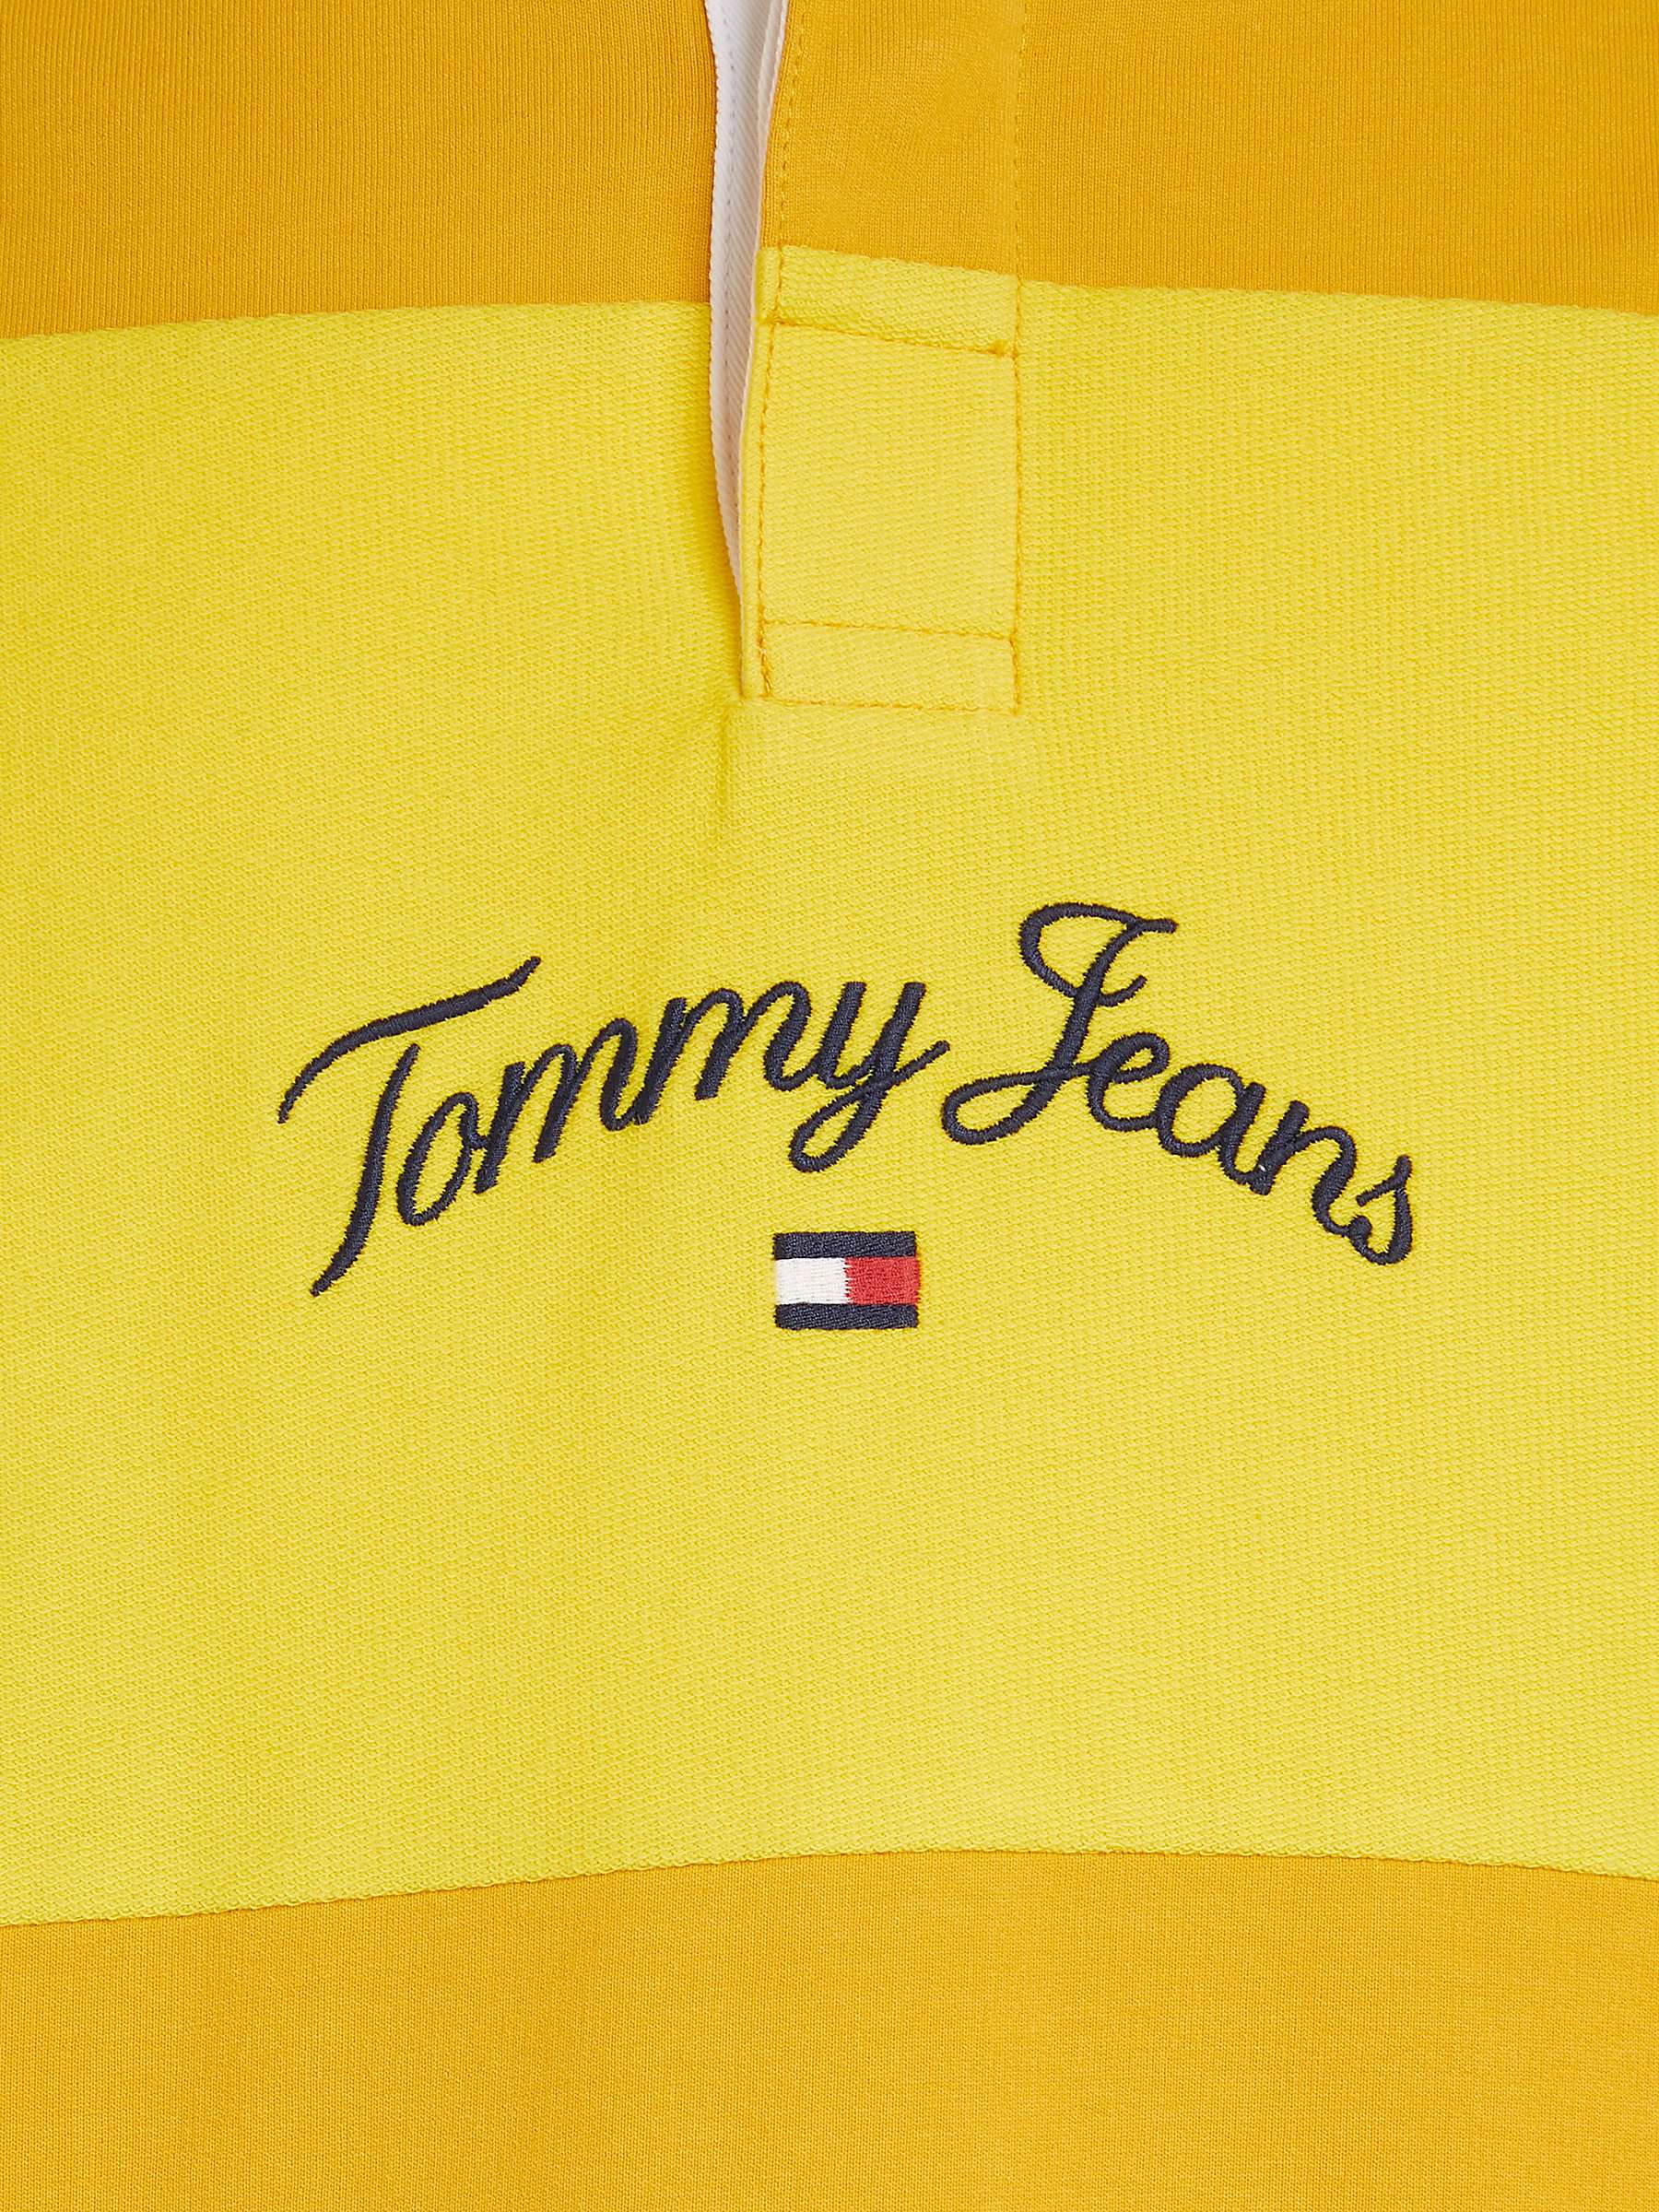 Buy Tommy Jeans Stripe Long Sleeve Rugby Shirt, College Gold Online at johnlewis.com